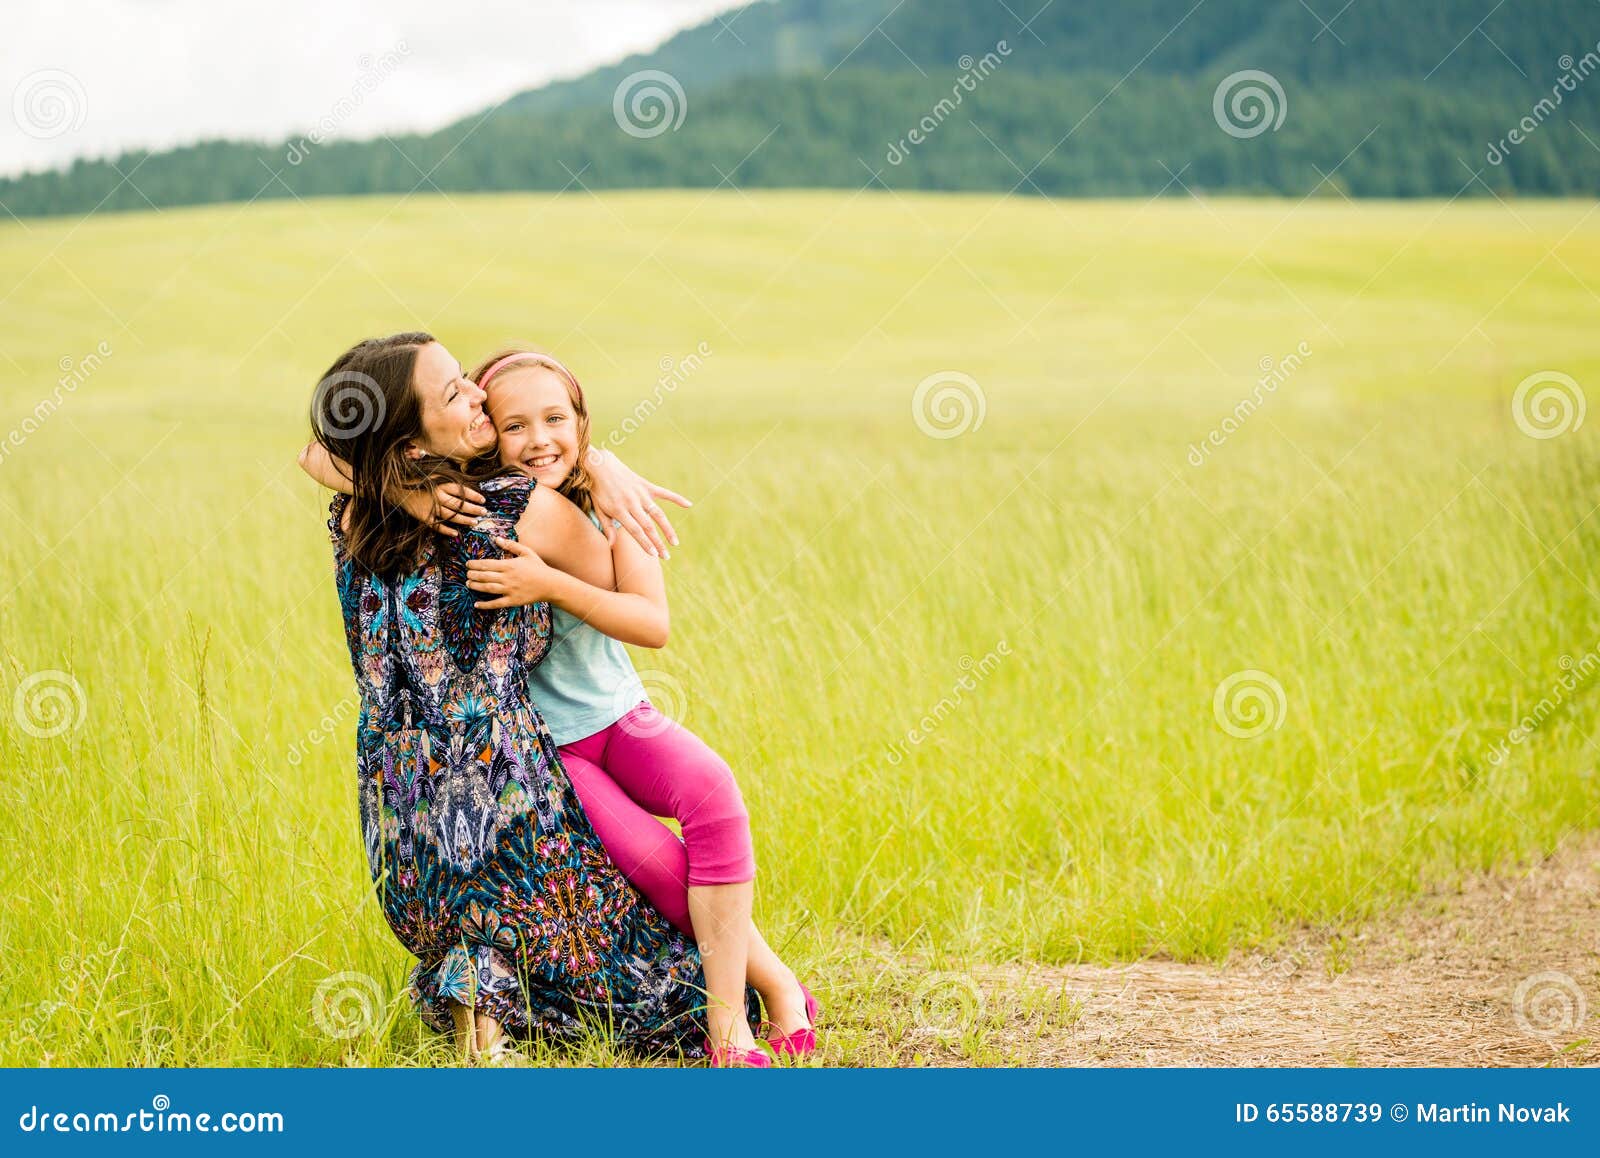 Mother and child embracing stock image. Image of green - 65588739